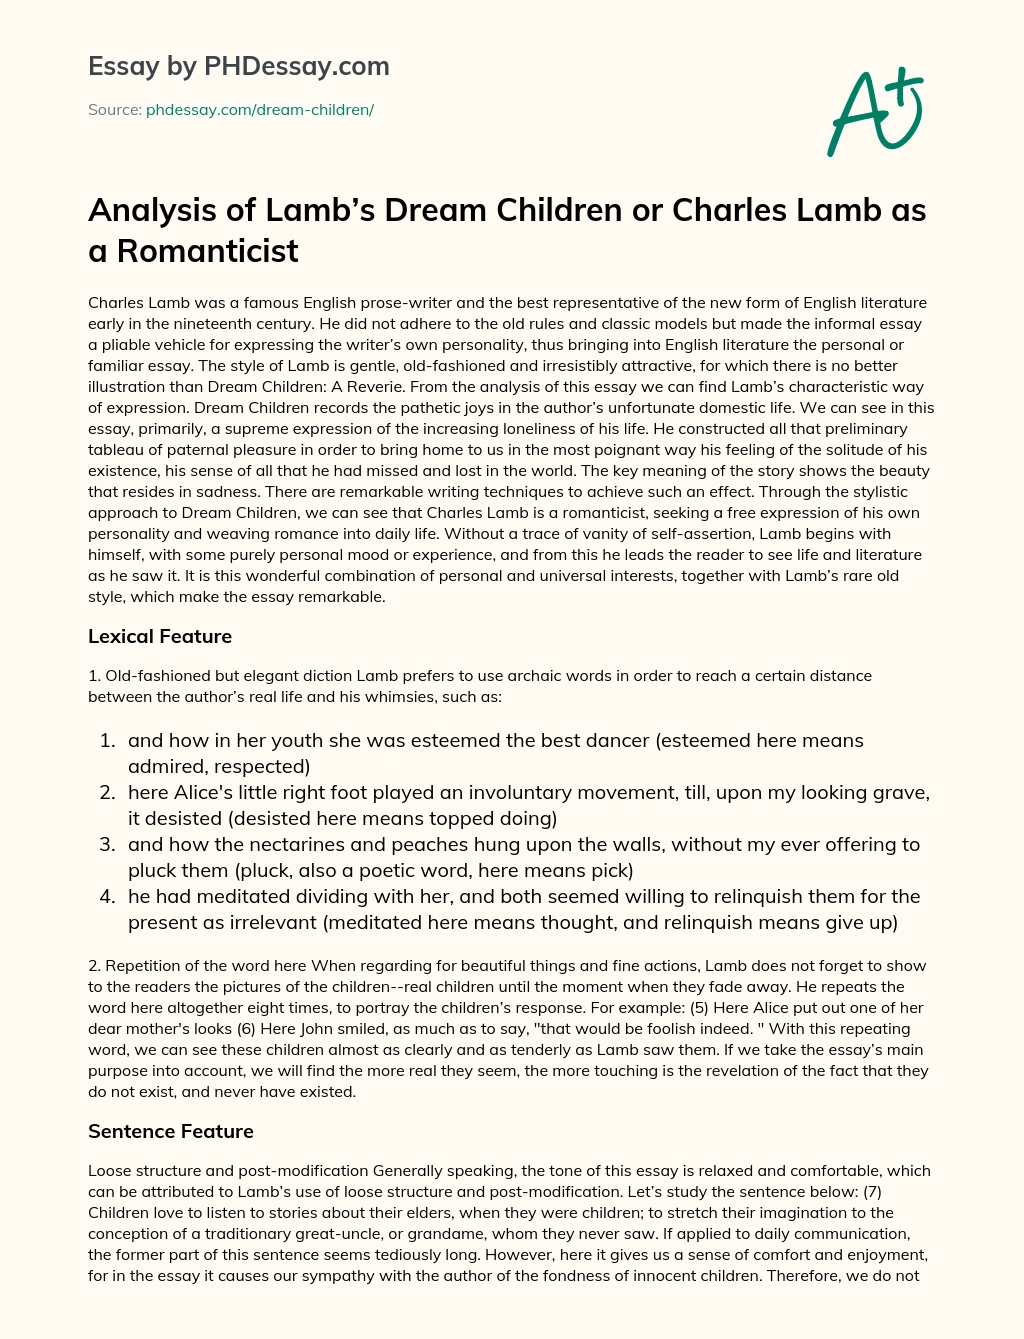 Analysis of Lamb’s Dream Children or Charles Lamb as a Romanticist essay